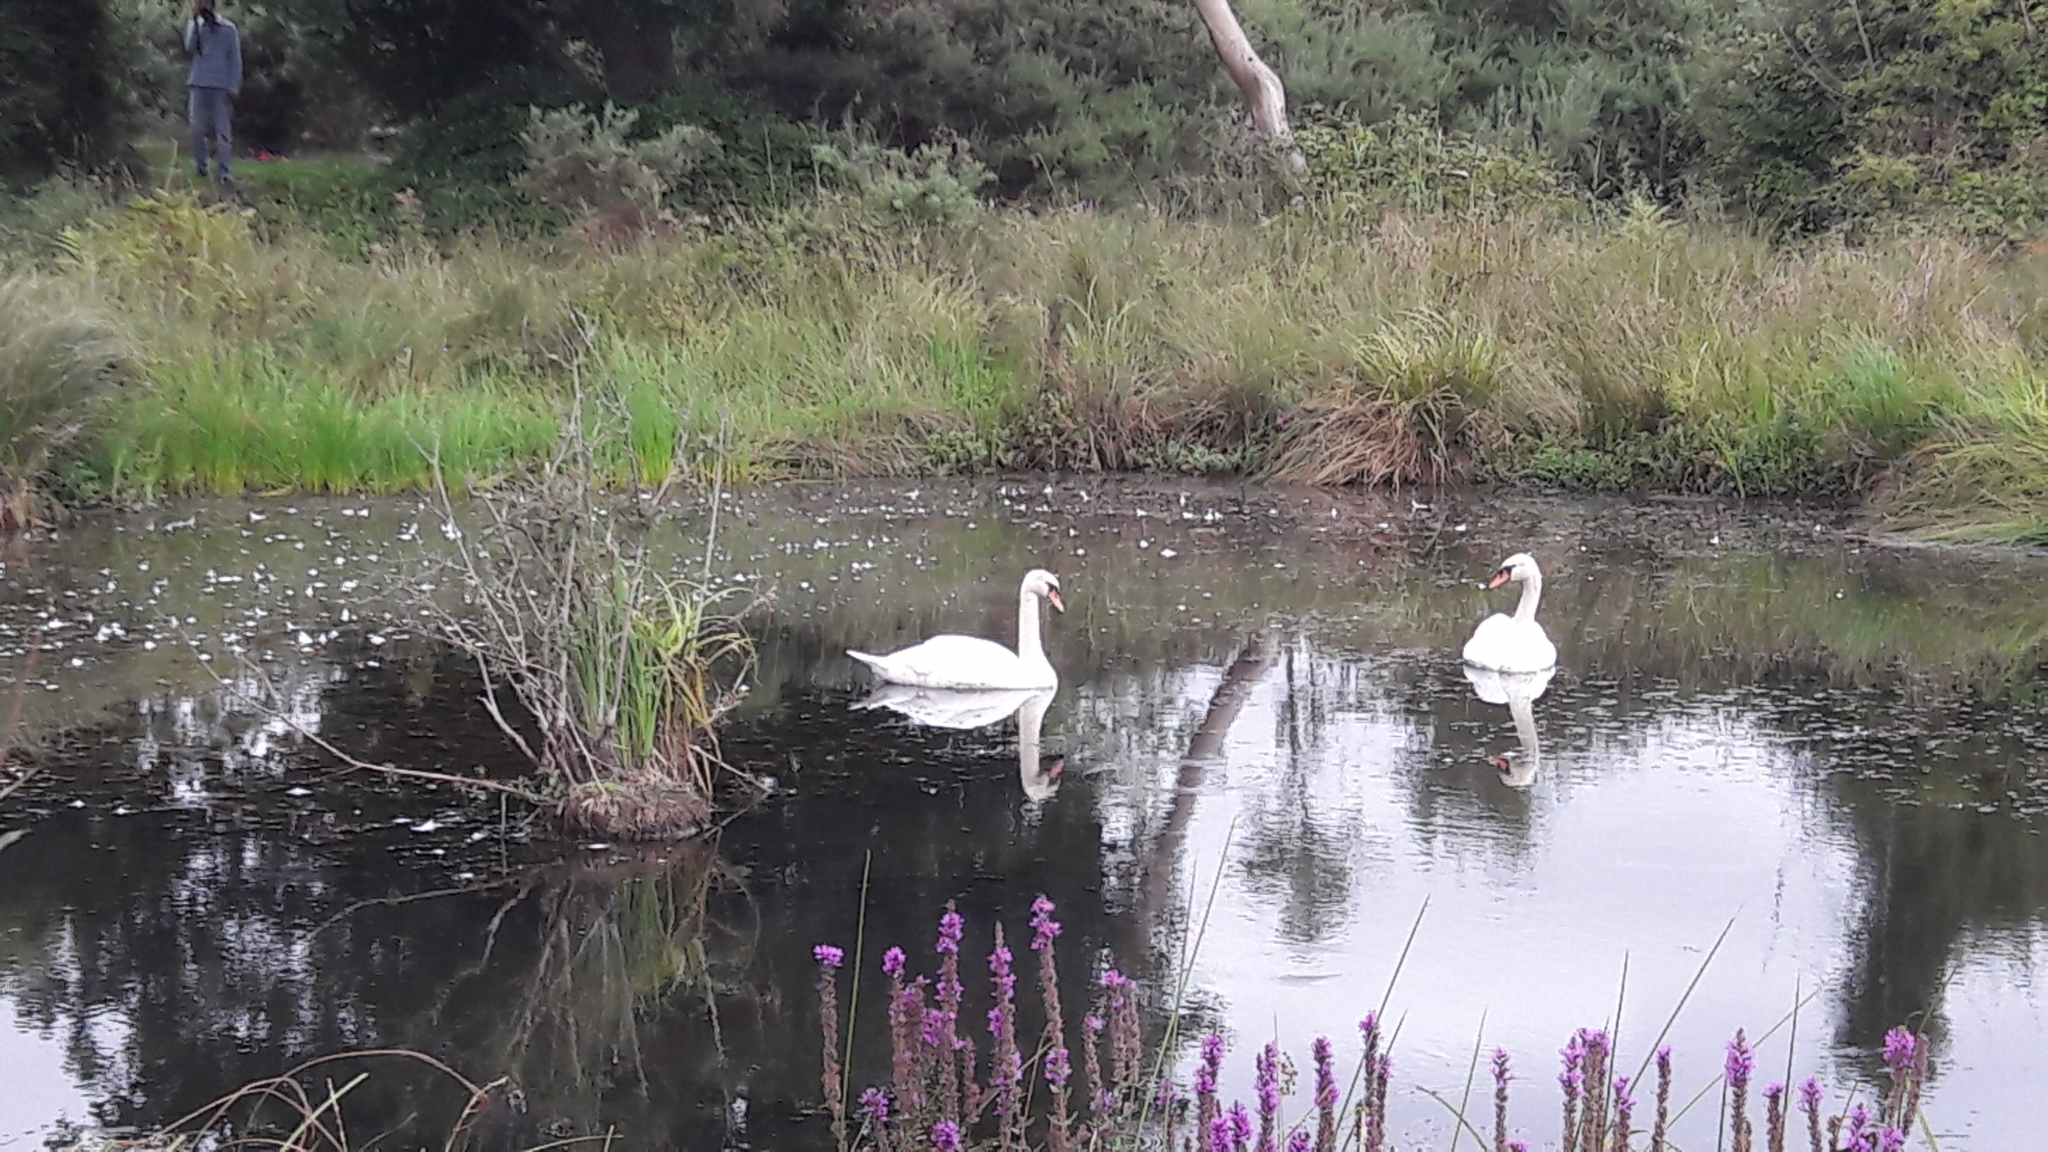 A photo from the FoTF Conservation Event - August 2018 - Gorse Removal at Hockham Hills & Holes : Two swans in one of the ponds